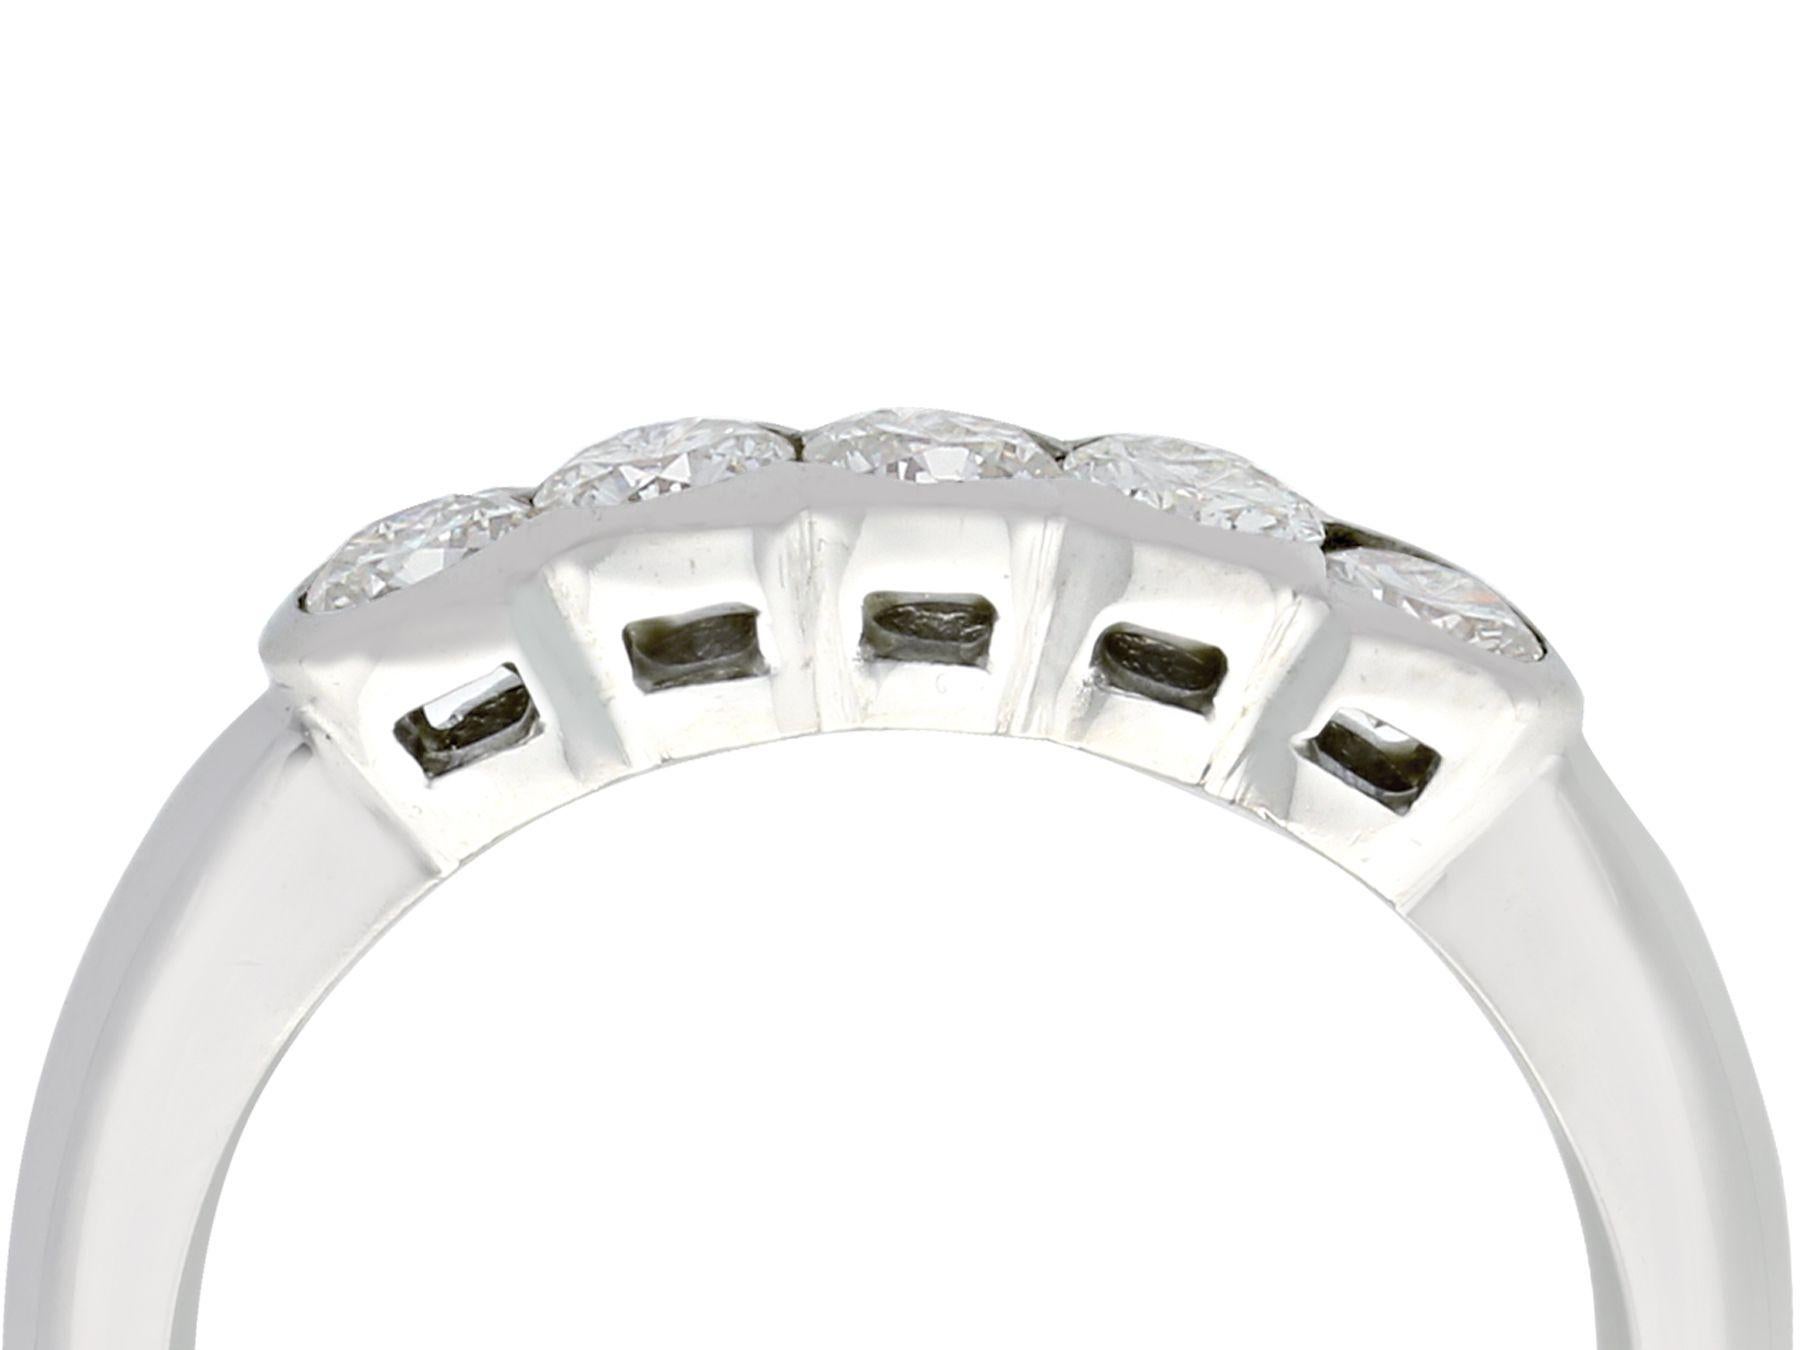 A fine and impressive contemporary 0.95 carat diamond and 18 karat white gold five stone ring; part of our contemporary jewelry and estate jewelry collections.

This impressive multi-diamond band ring has been crafted in 18k white gold.

The ring